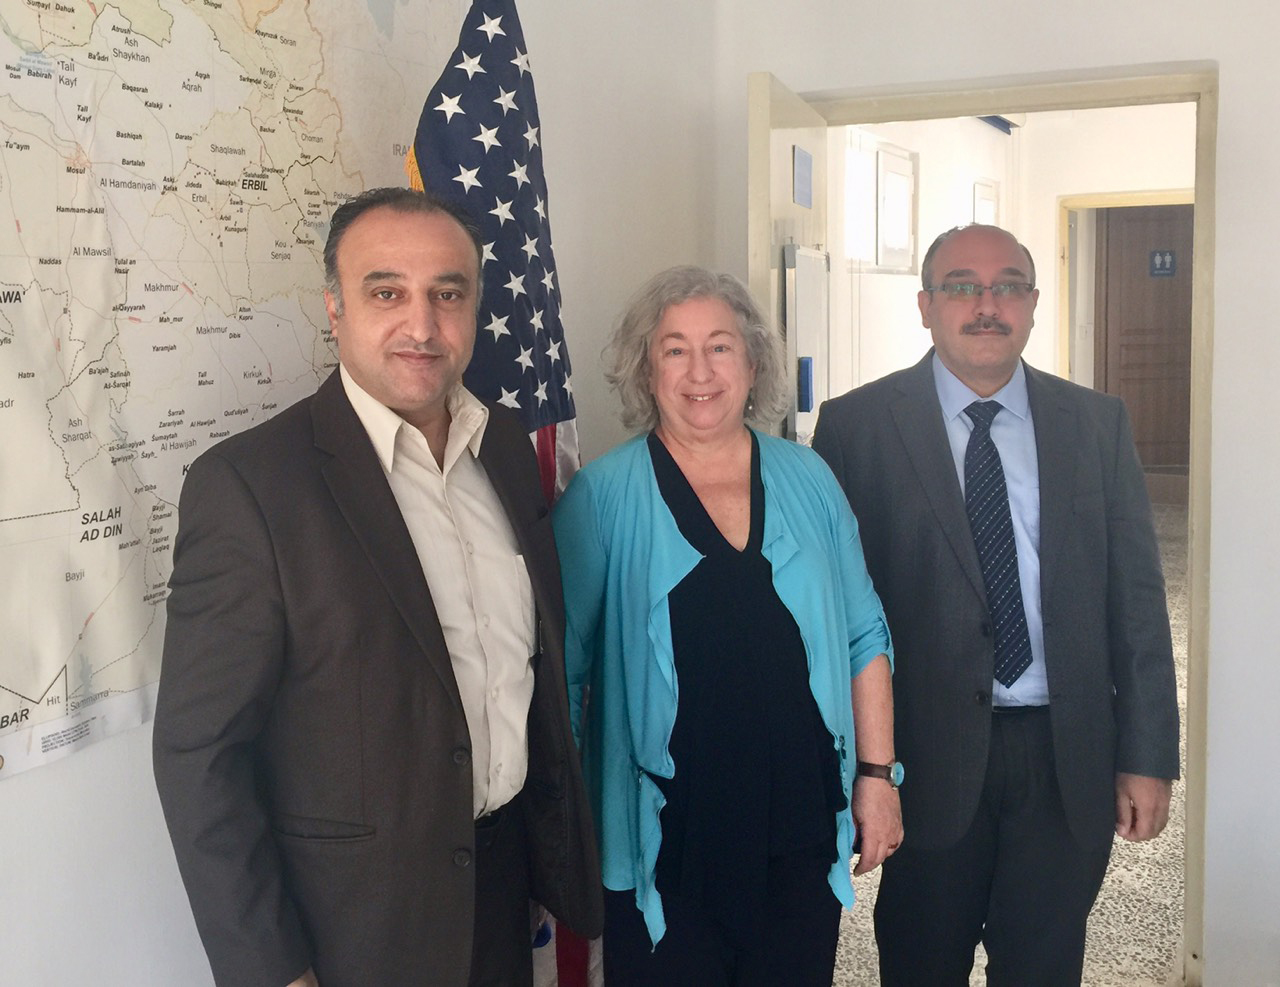 Meeting at the US Consulate Office in Erbil with MP Yacoob G Yaqo and Ashur Sargon discussing our IDPs